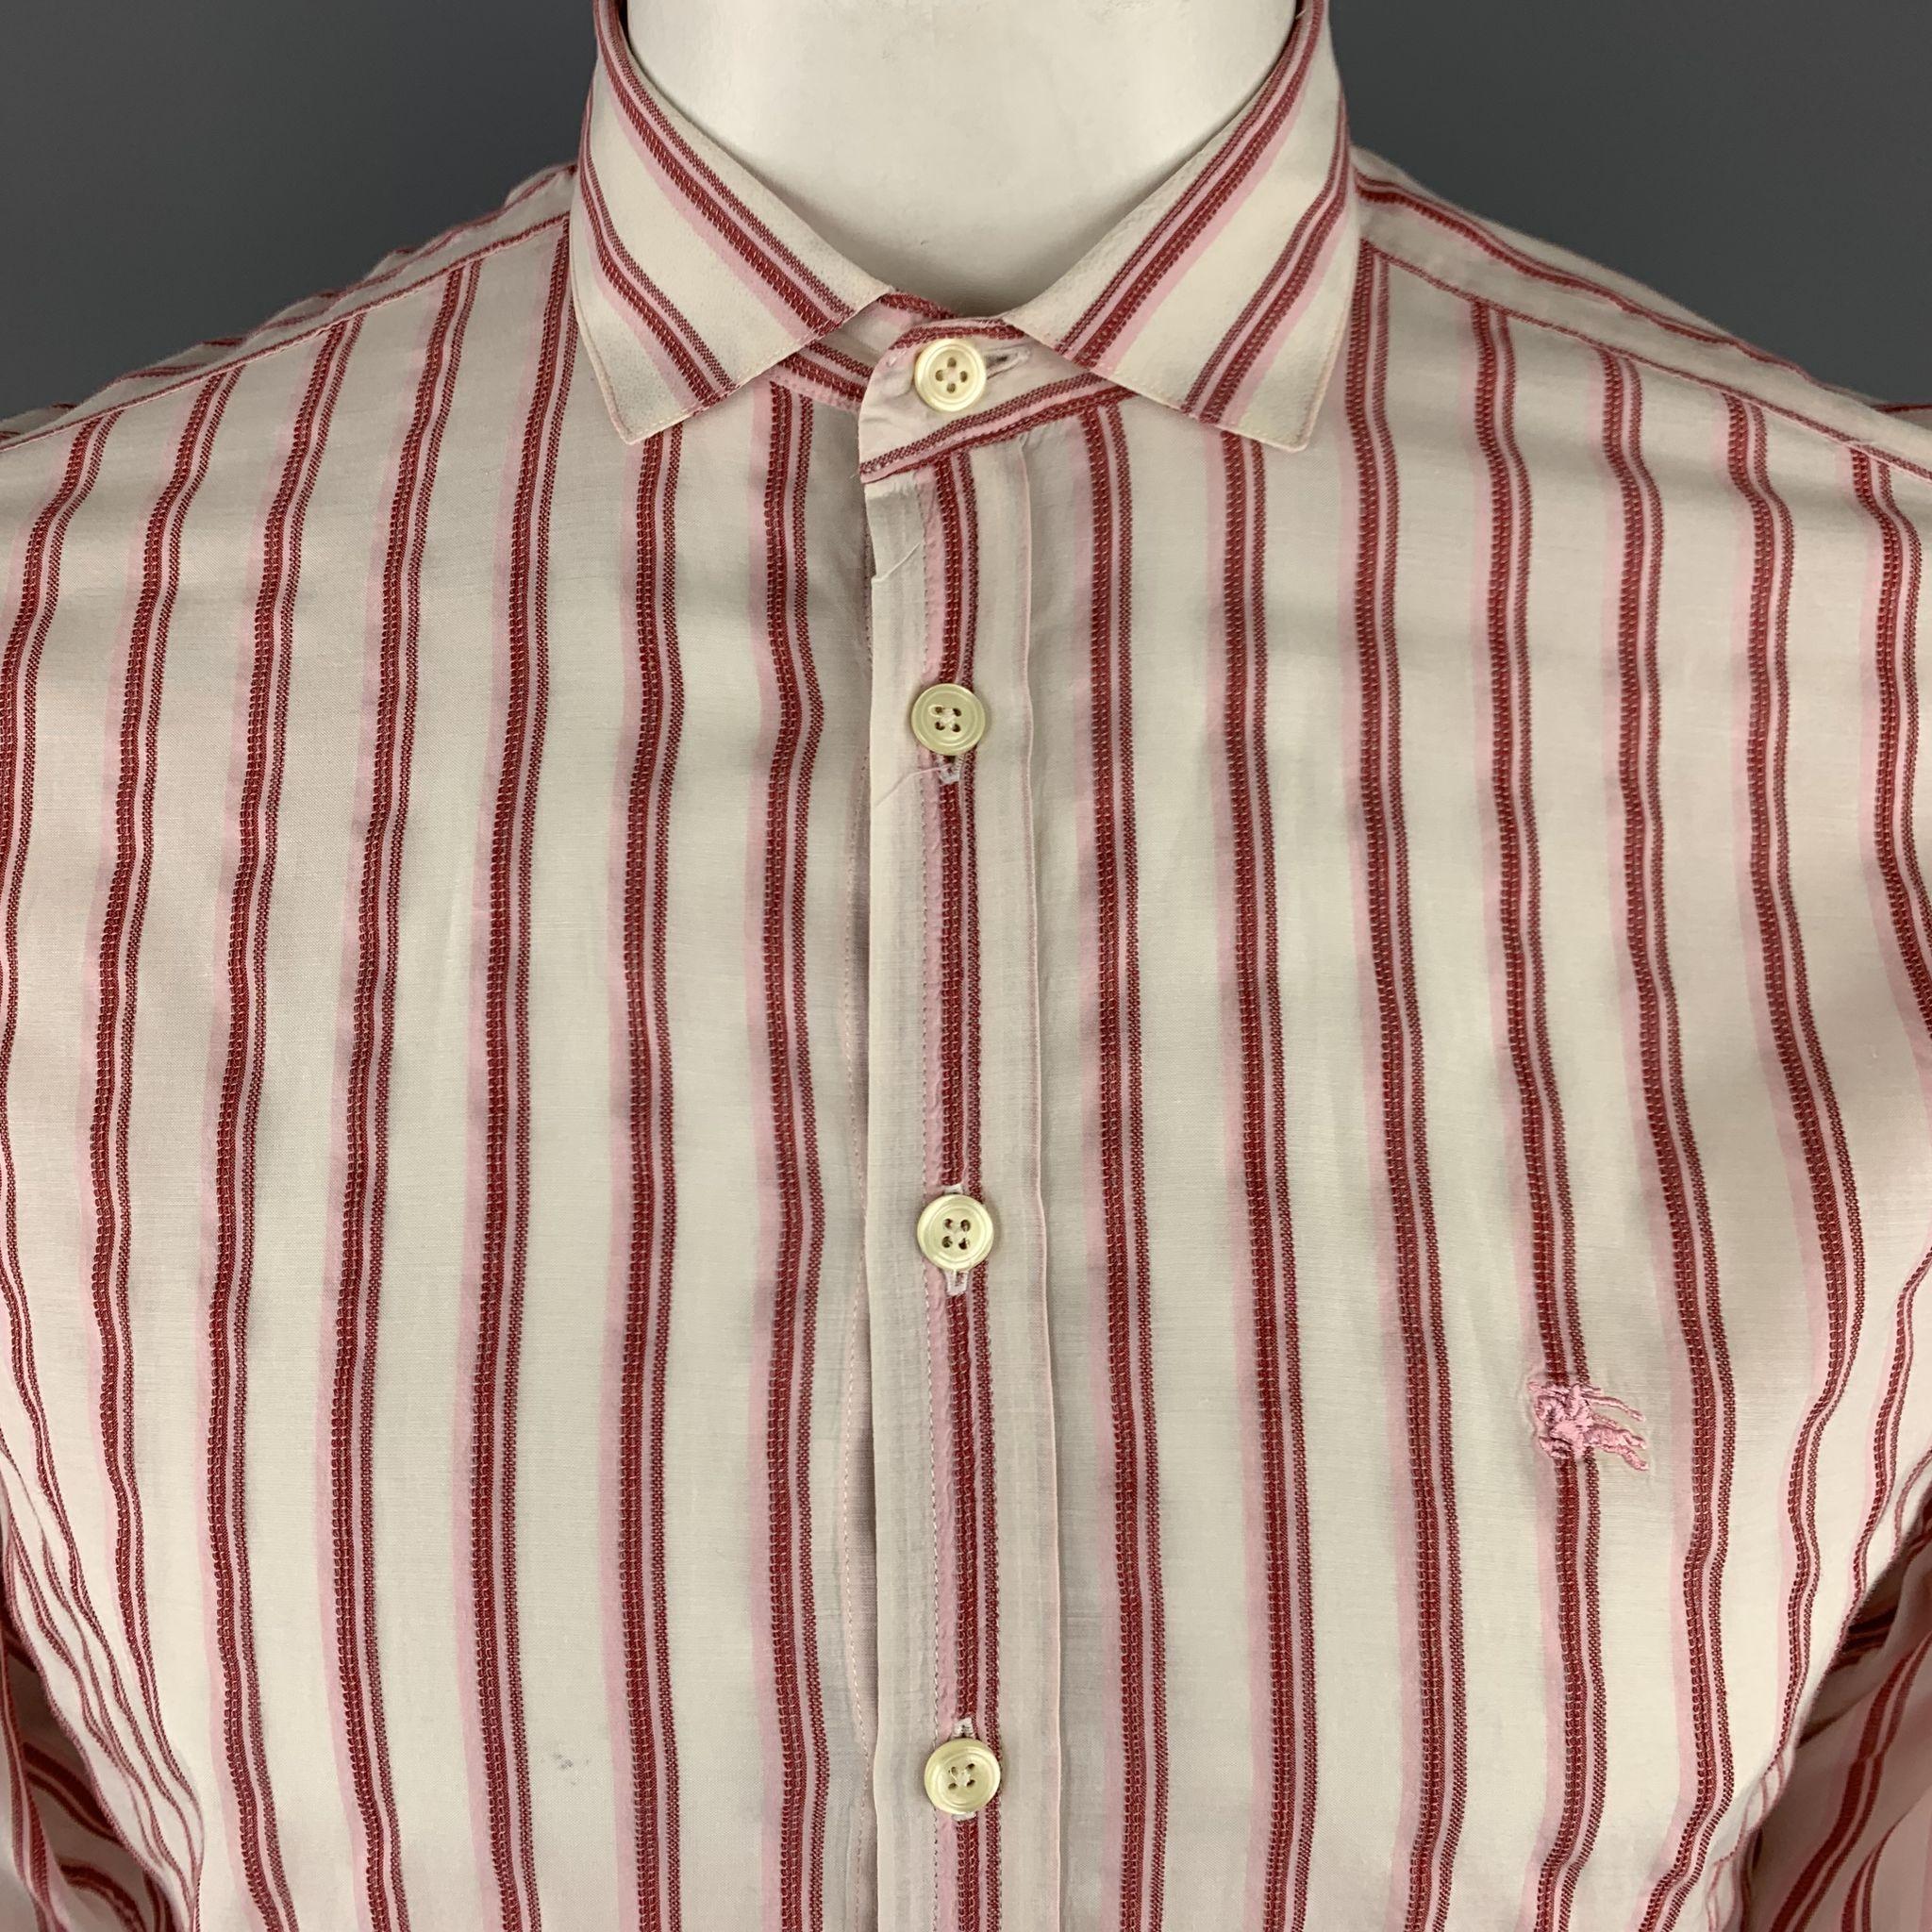 BURBERRY LONDON Long Sleeve Shirt comes in a brick tone in a striped cotton blend material, with a spread collar, double buttoned cuffs, button up. Made in the UK.
 
Very Good Pre-Owned Condition.
Marked: L
 
Measurements:
Shoulder: 17 in.
Chest: 46